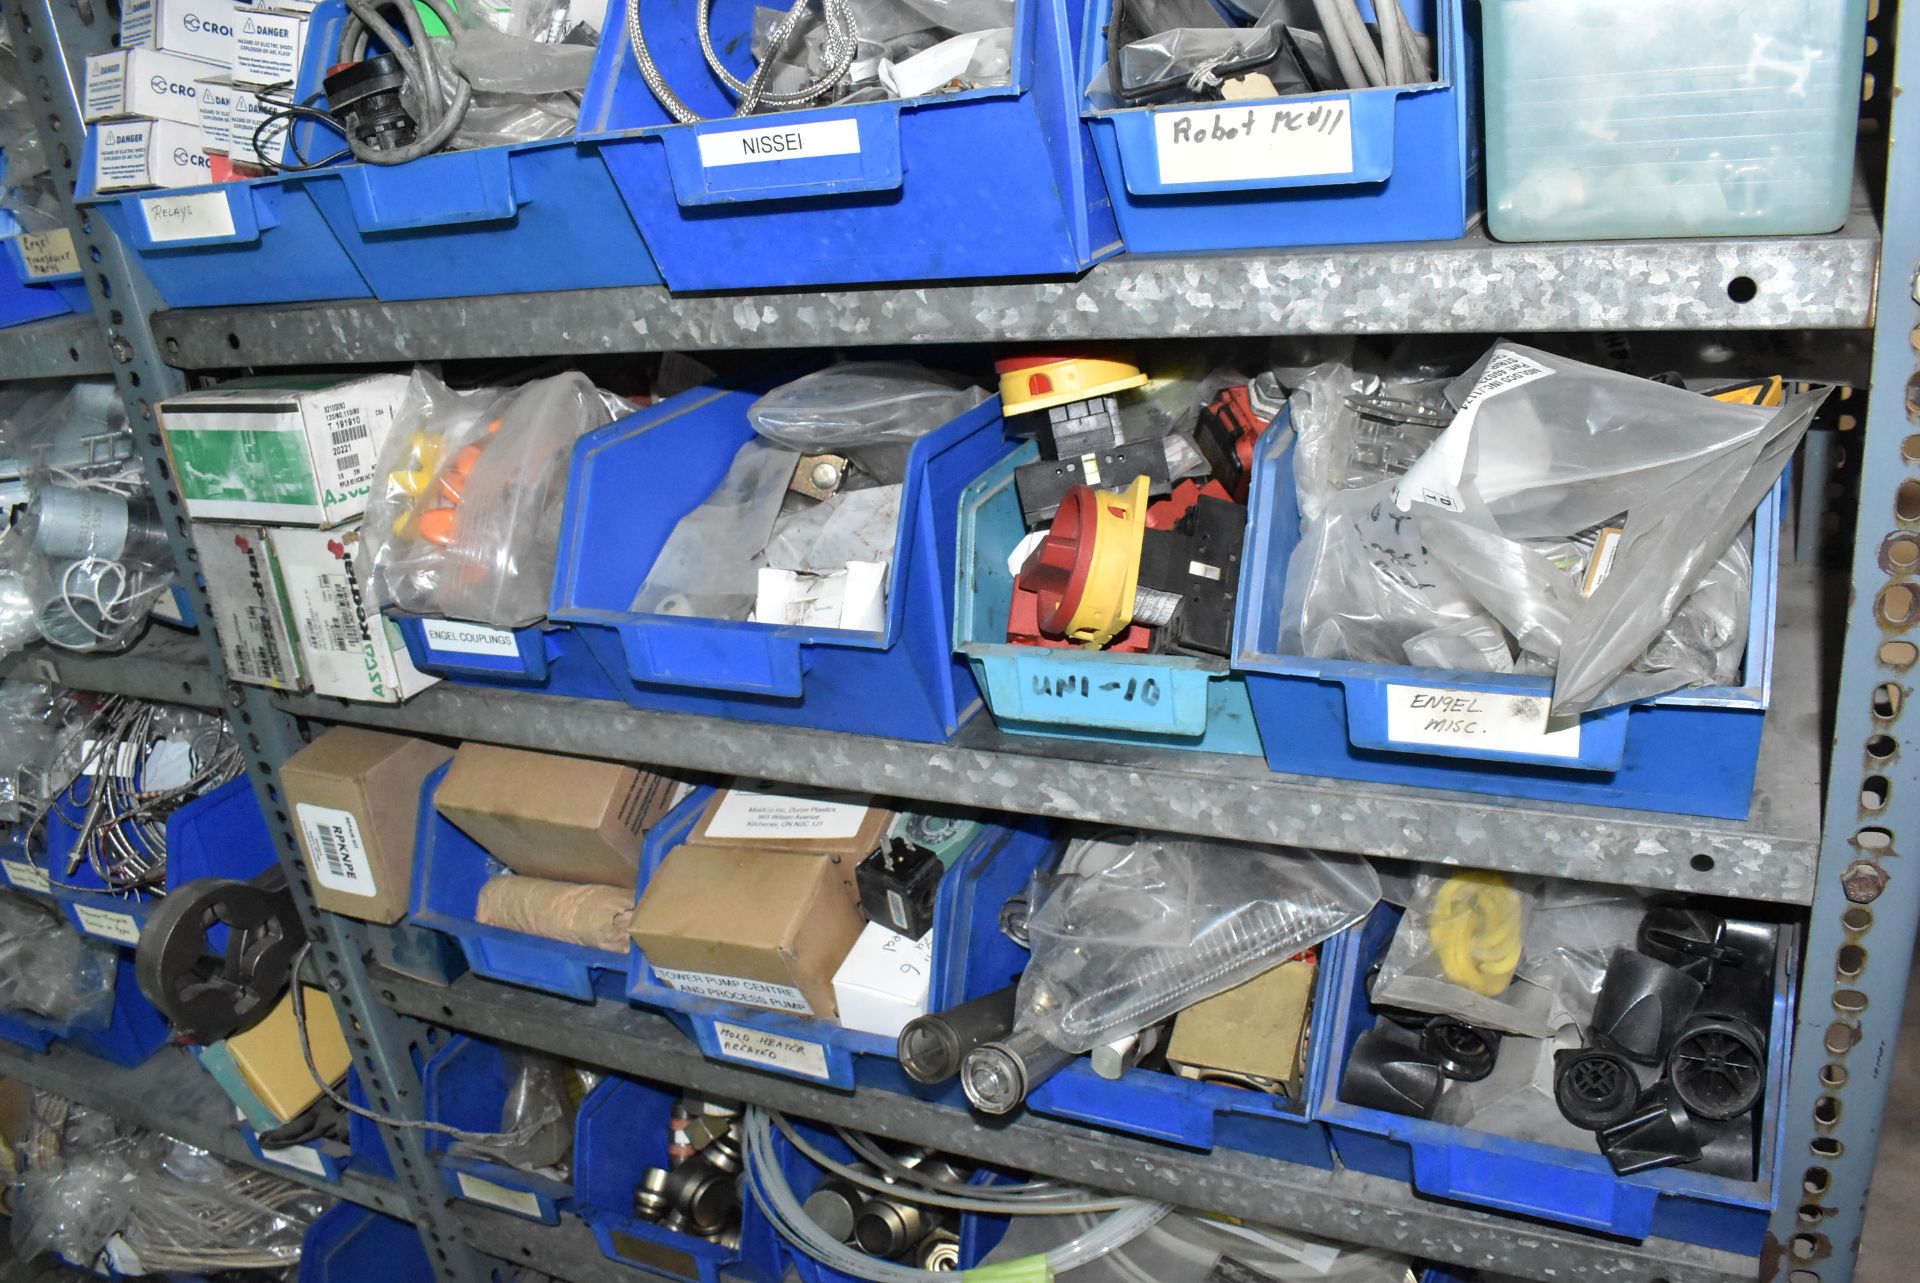 LOT/ CONTENTS OF SHELF CONSISTING OF ELECTRICAL SUPPLIES AND HARDWARE - Image 3 of 4